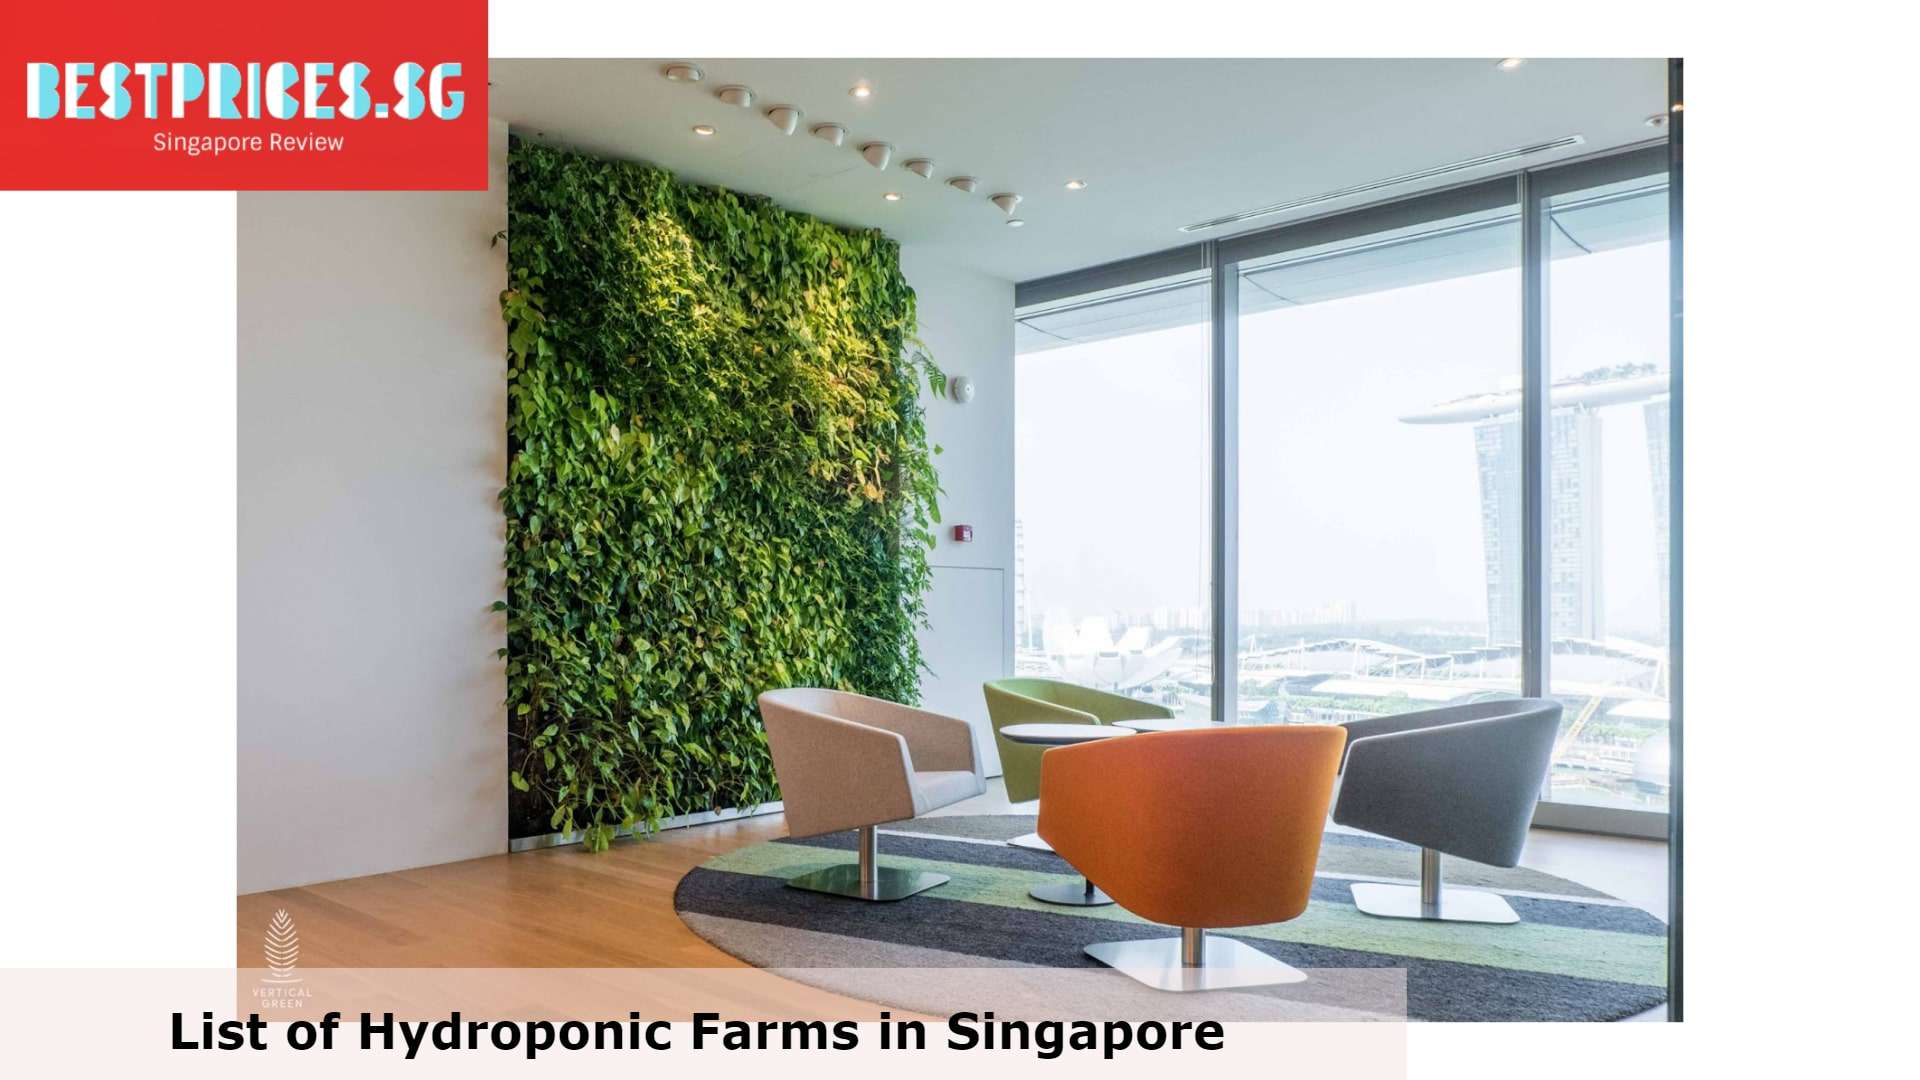 Vertical Green Pte. Ltd. - Hydroponic Farm Singapore, Hydroponics Singapore hdb, Hydroponics system Singapore, Hydroponics Singapore farm, Hydroponics Singapore home, Hydroponics Equipment Suppliers Singapore, What can you grow in hydroponics Singapore?, How much does it cost for a hydroponic setup?, Is a hydroponic system worth it?, Hydroponics Kits, Hydroponics Indoors, Vertical Hydroponic System, best indoor garden Singapore, Which indoor plants are suitable for hydroponics?, 